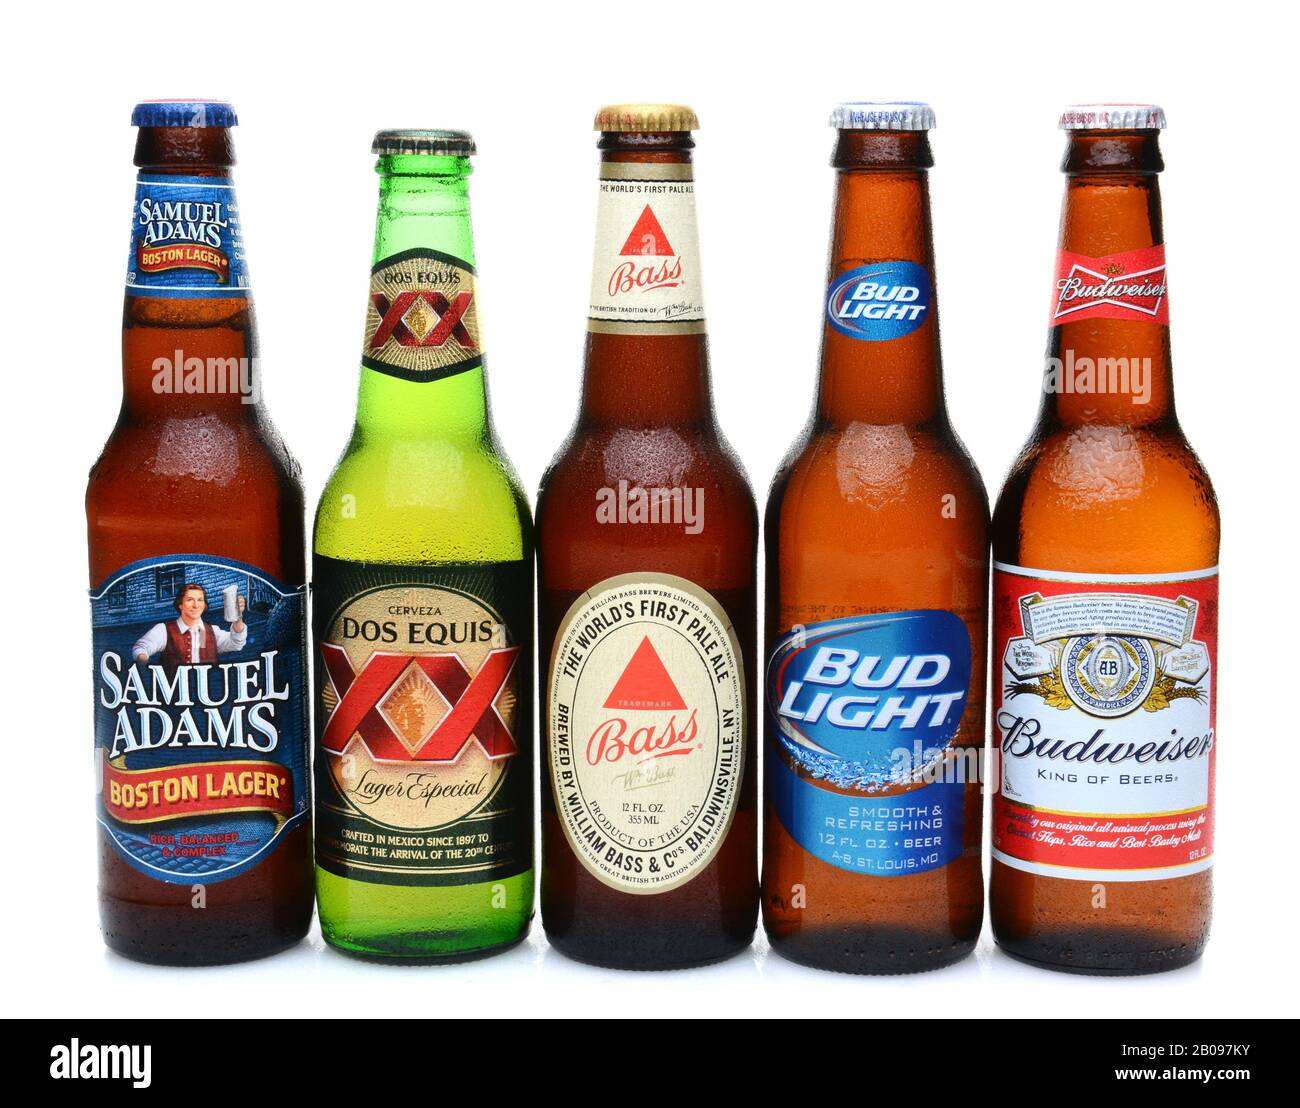 IRVINE, CALIFORNIA - JULY 14, 2014: 5 bottles of assorted cold beers. Domestic and Imported brews including, Budweiser, Bud Light, Bass, Dos Equis and Stock Photo